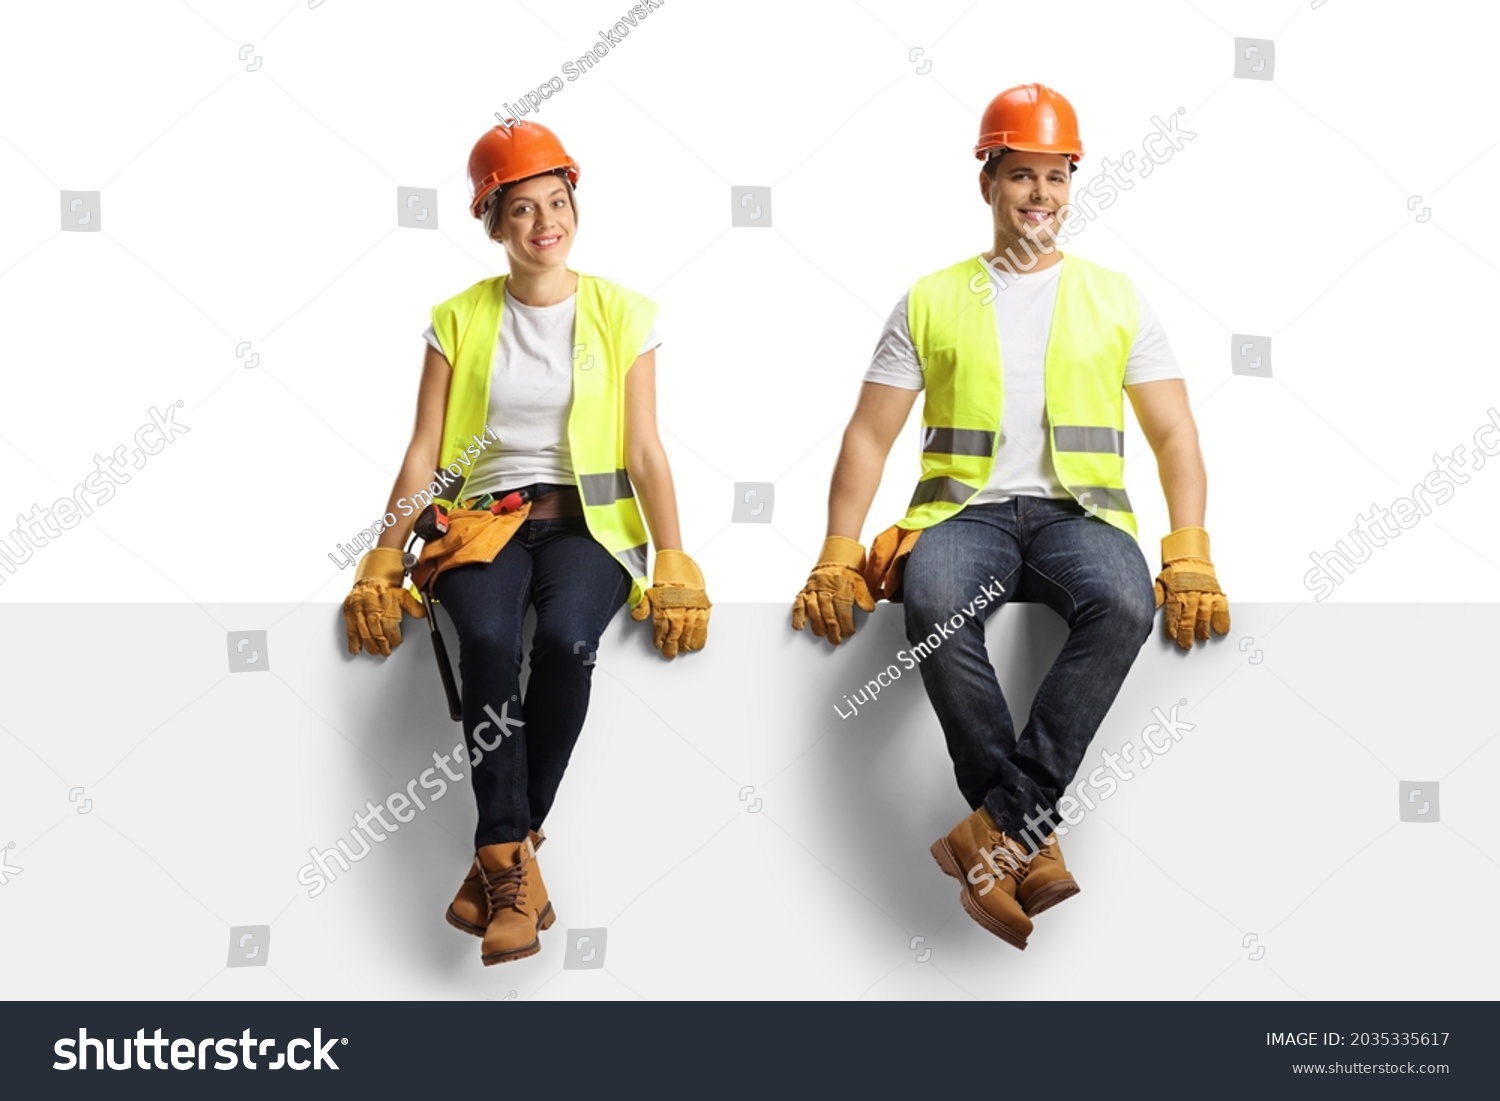 Male and female construction workers sitting on a panel and smiling at camera isolated on white background #2035335617